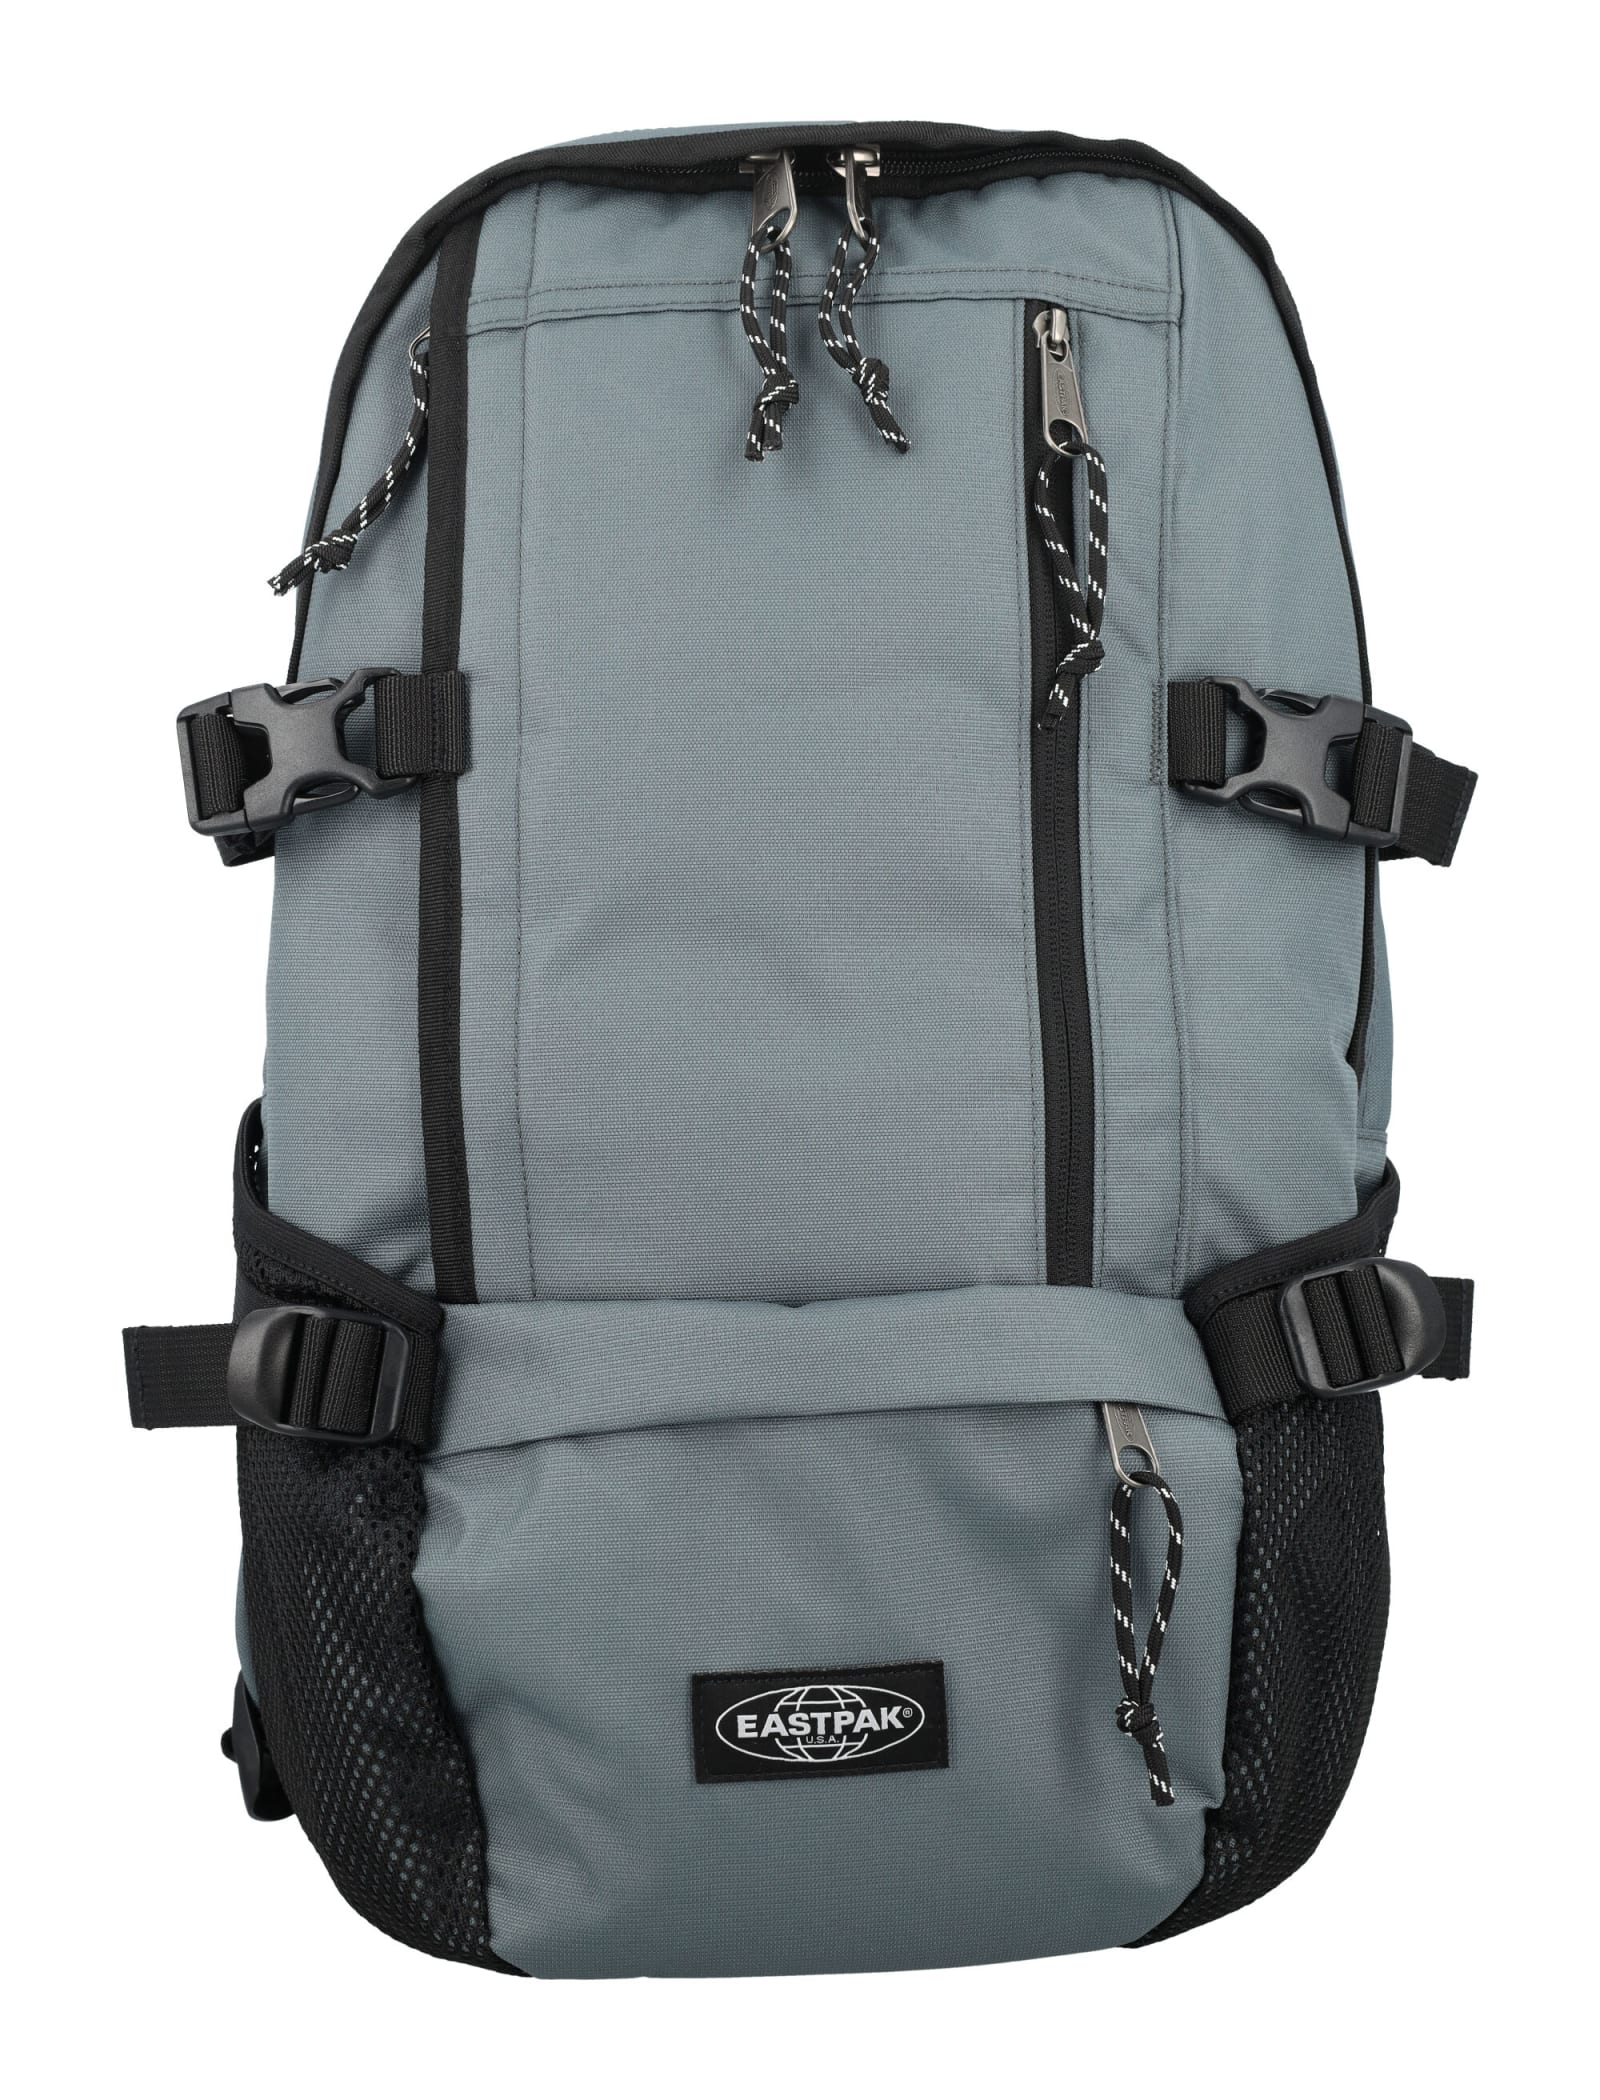 Eastpak Floid Backpack In Stormy